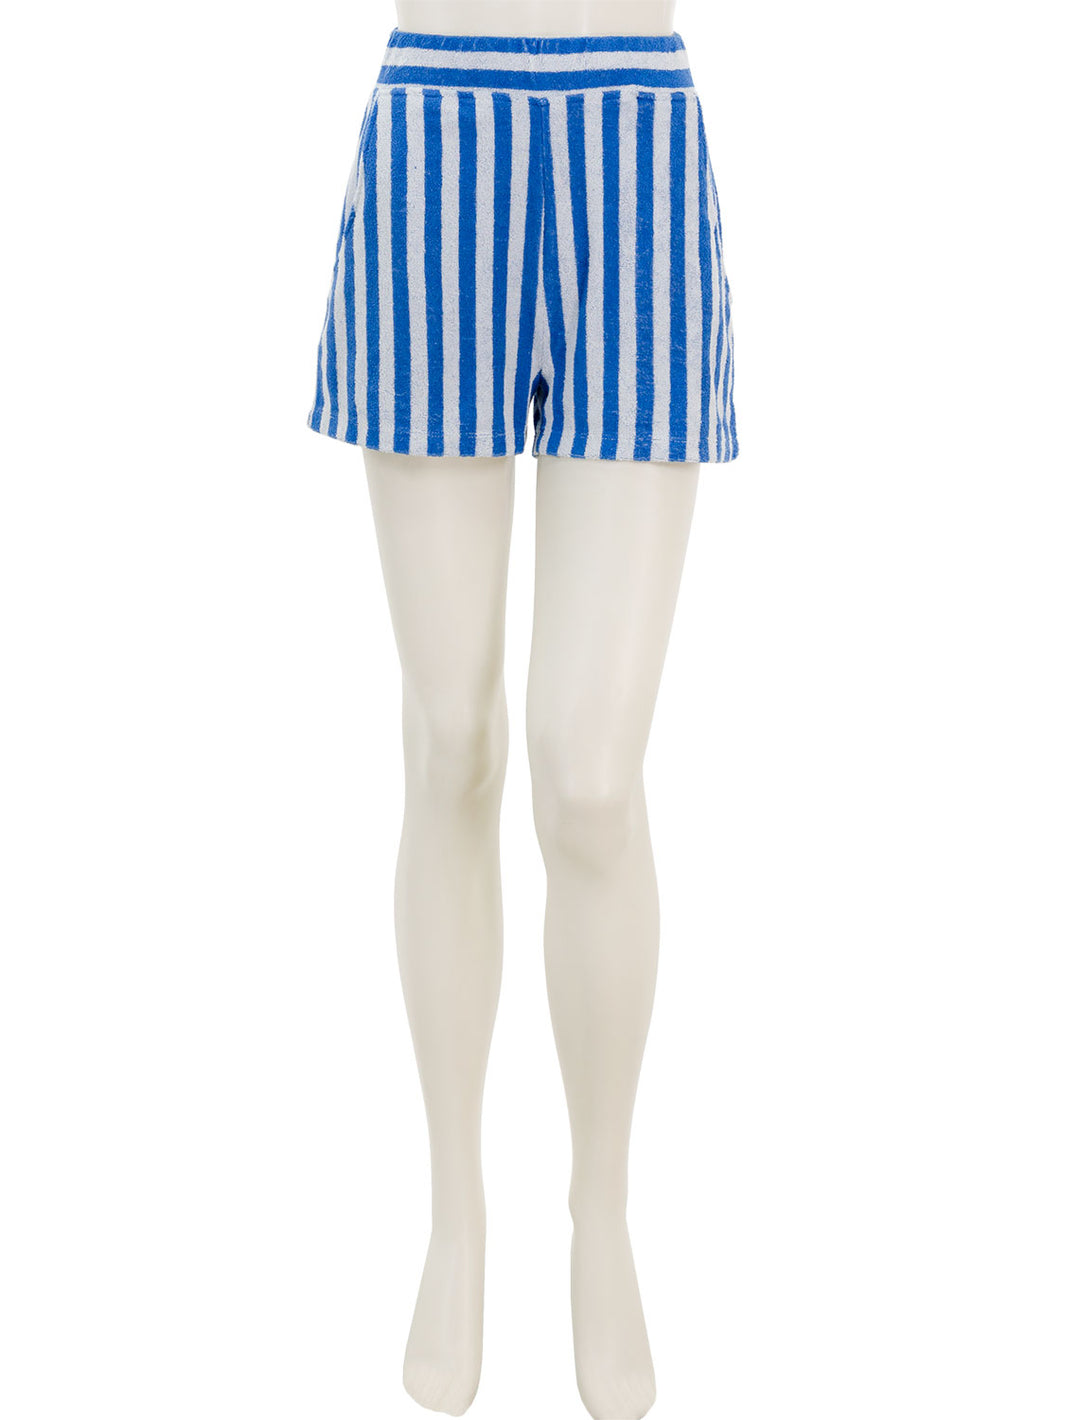 Front view of KULE's the terry venus in royal and poppy stripe.